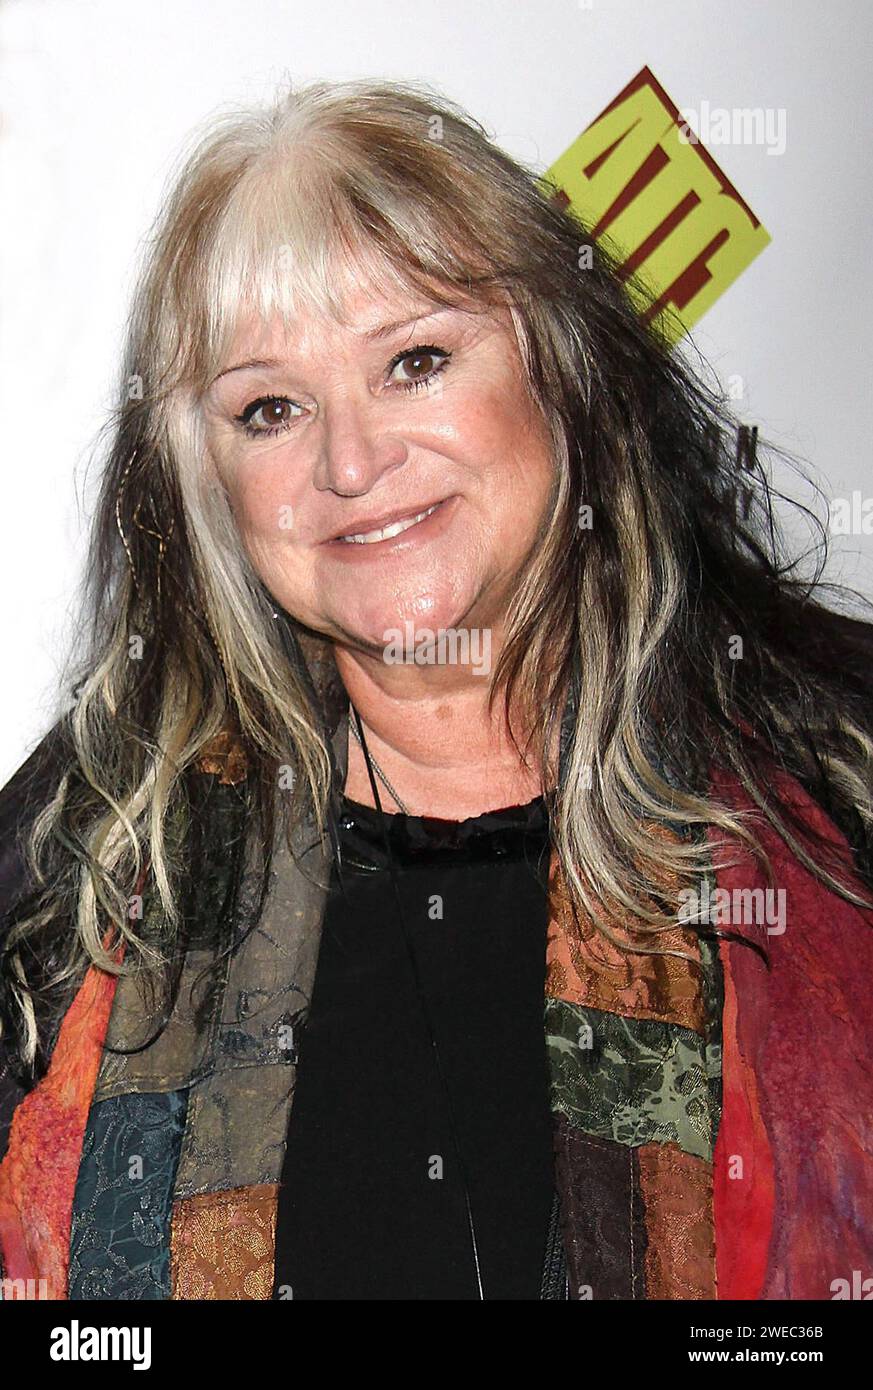 **FILE PHOTO** Melanie Has Passed Away. NEW YORK, NY- OCTOBER 7, 2013: Melanie Safka aka singer Melanie arrives for the Abingdon Theatre Company Honors, held at Espace on October 7, 2013 in New York City. Credit: Joseph Marzullo/MediaPunch Stock Photo